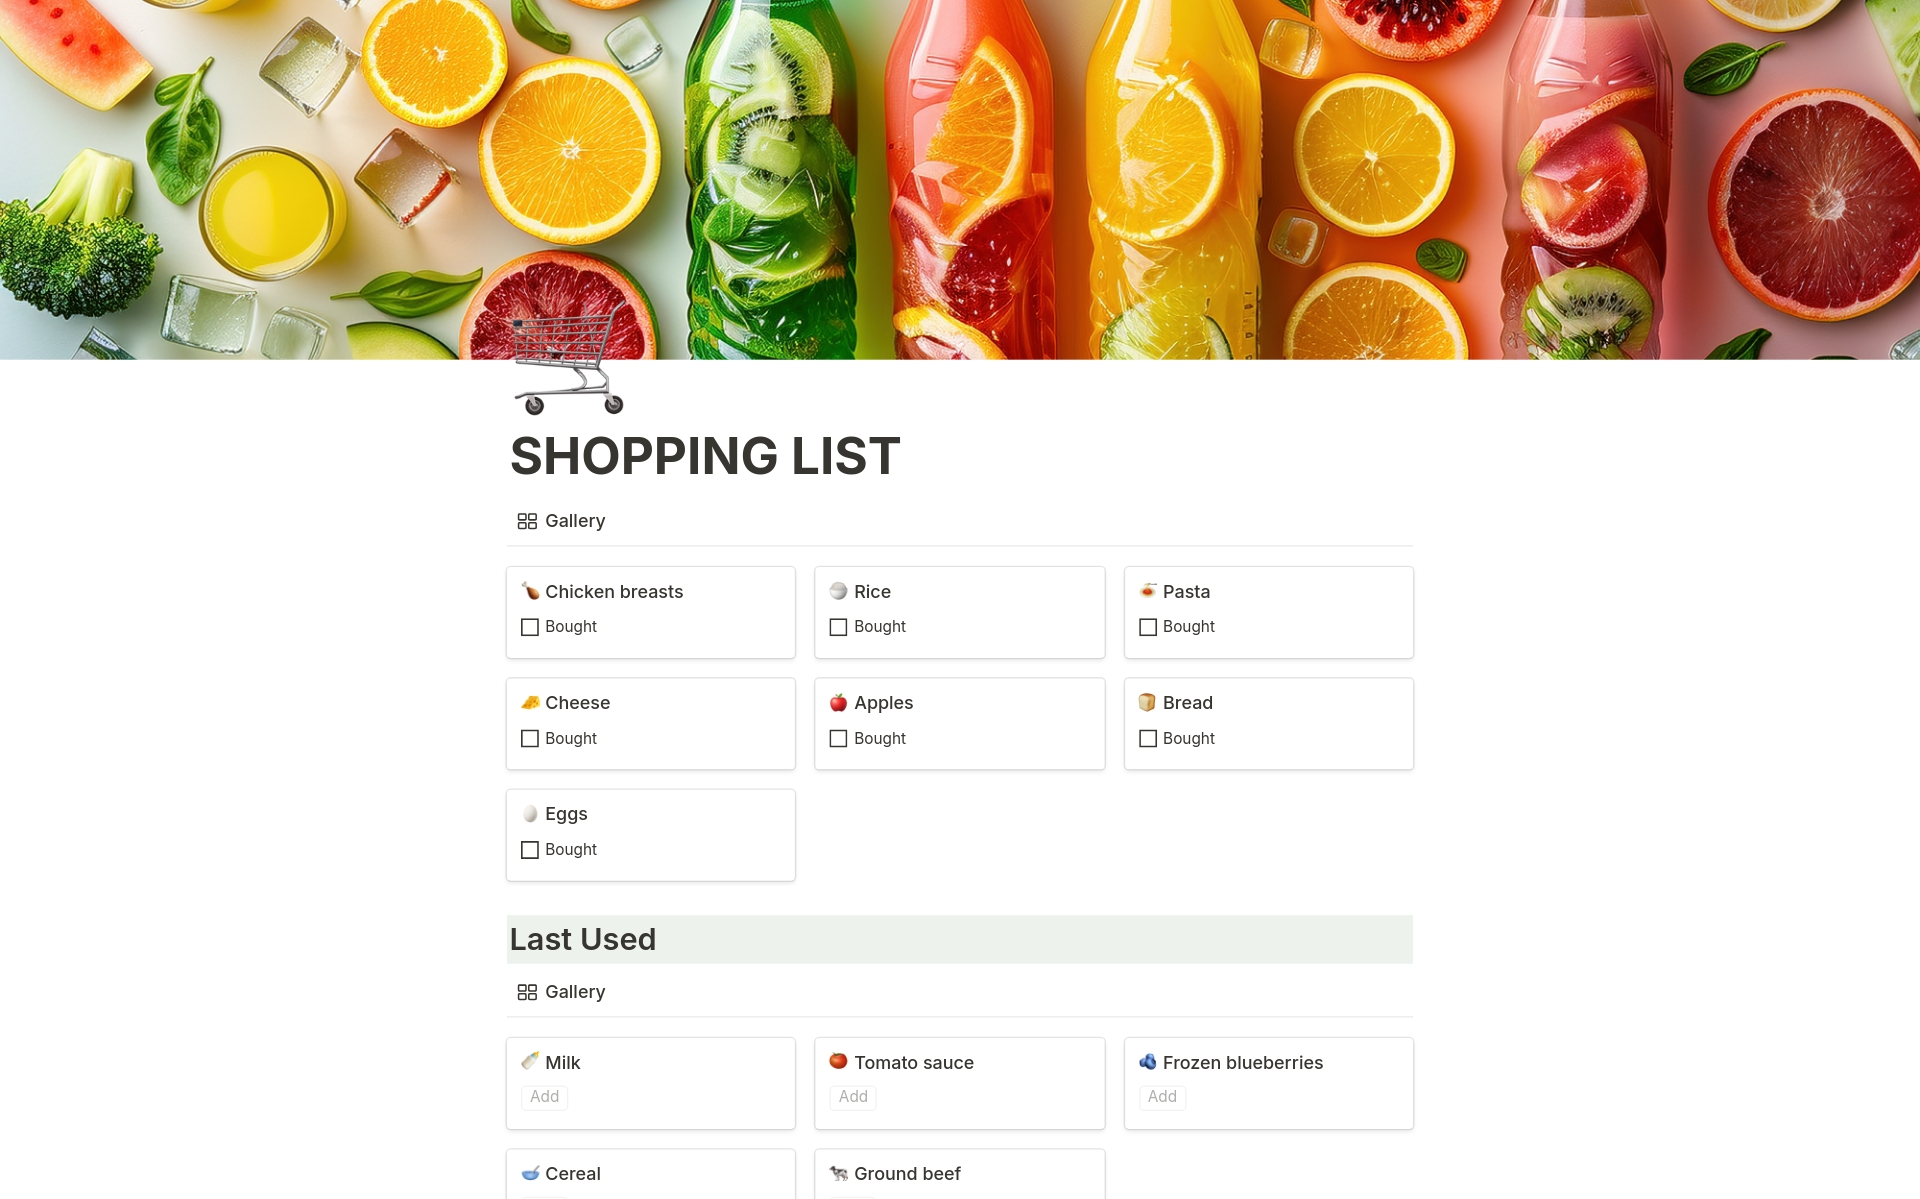 Our practical grocery shopping list template helps you plan your purchases efficiently and ensures you never forget anything. Organize your groceries by categories and manage your weekly shopping effortlessly, whether you're at the store or shopping online.